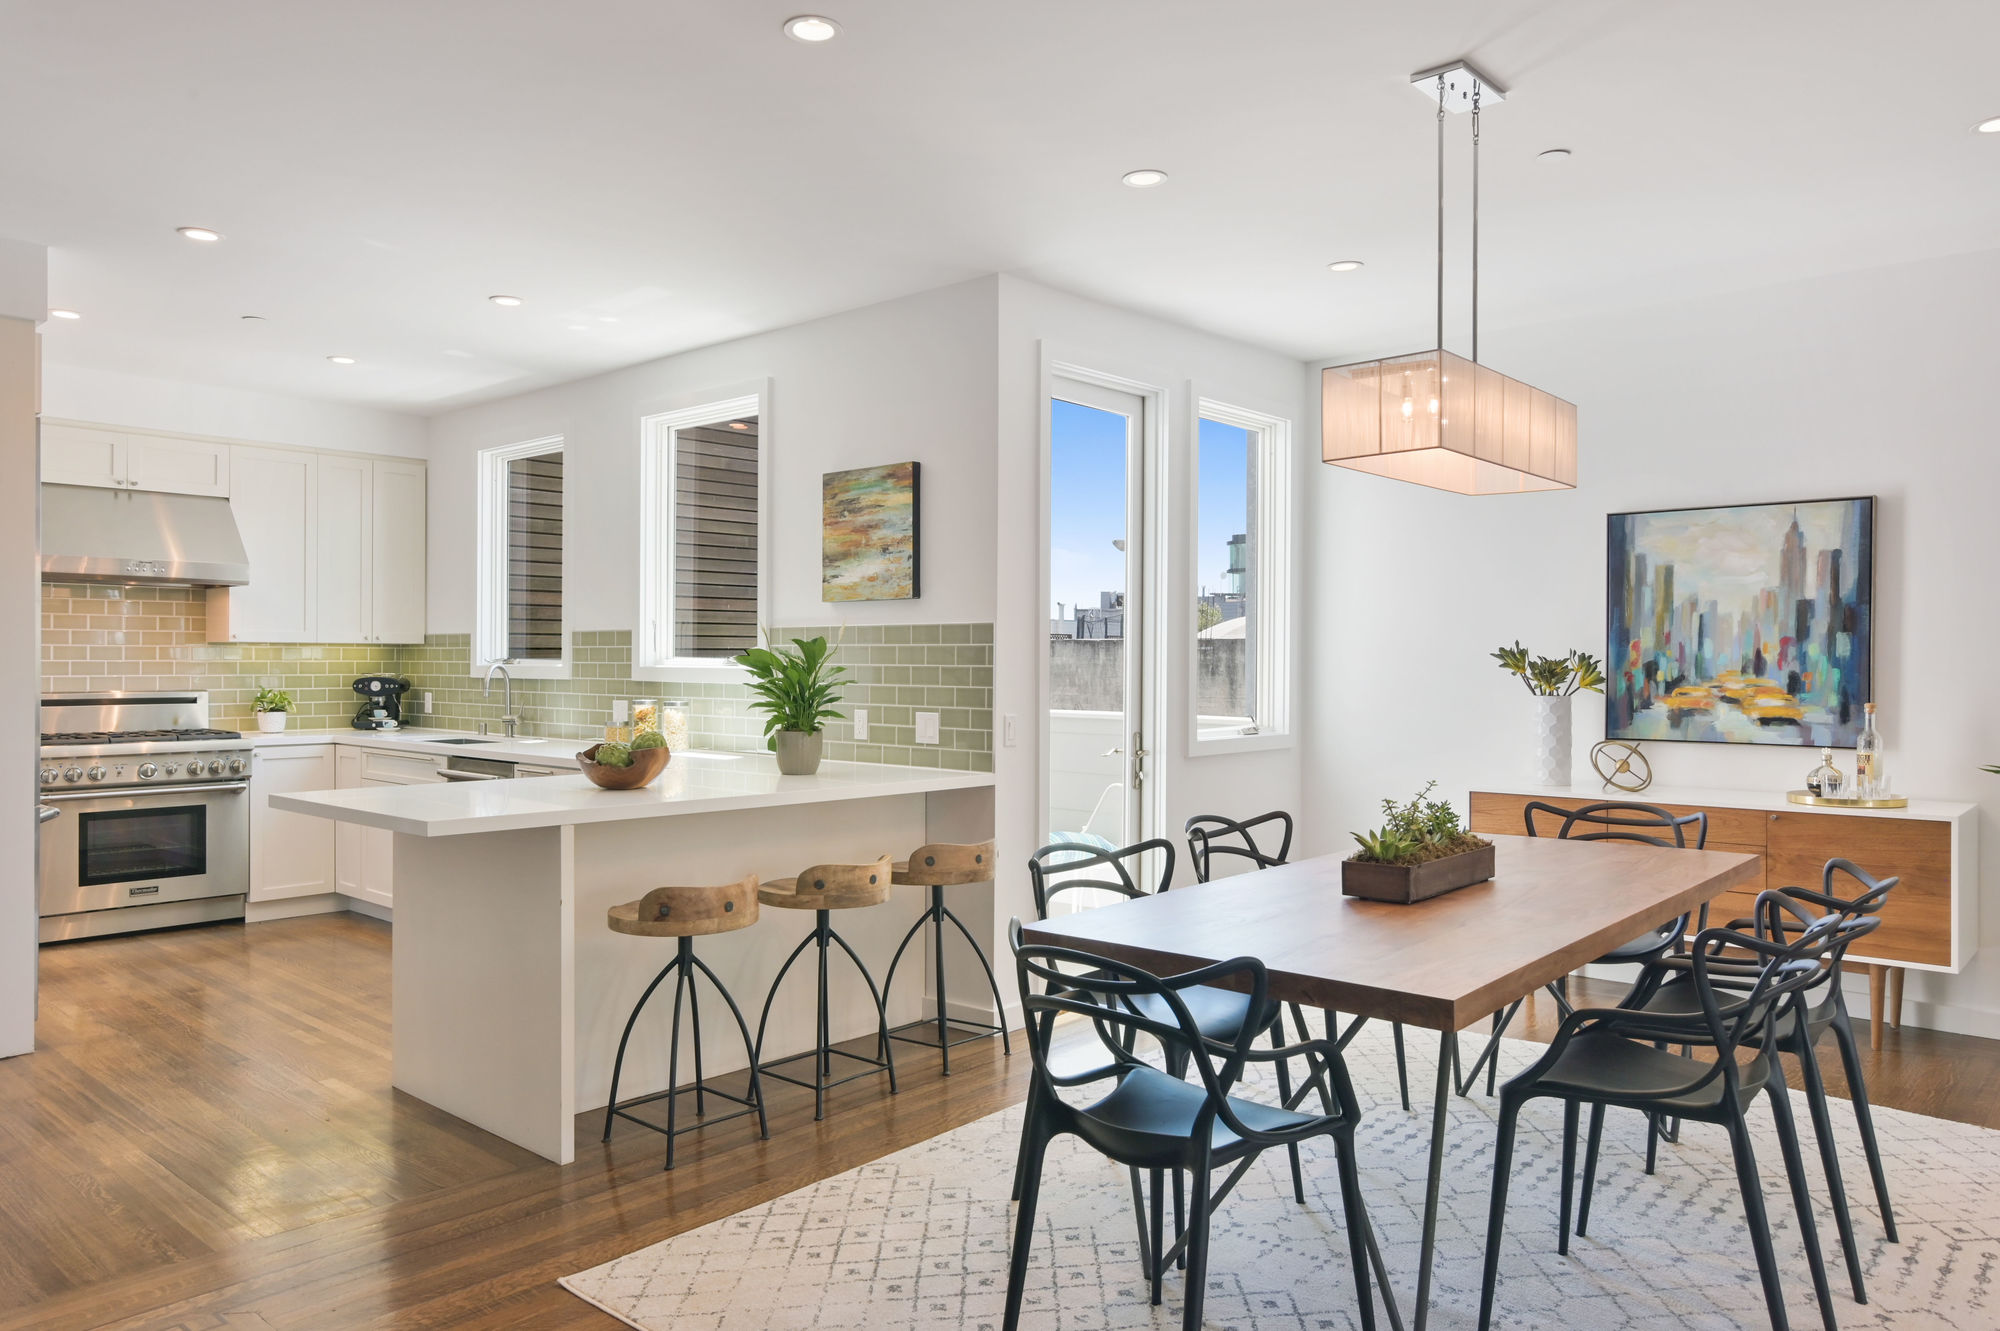 Property Photo: Open floor plan view of the dining area and kitchen, featuring lots of natural light